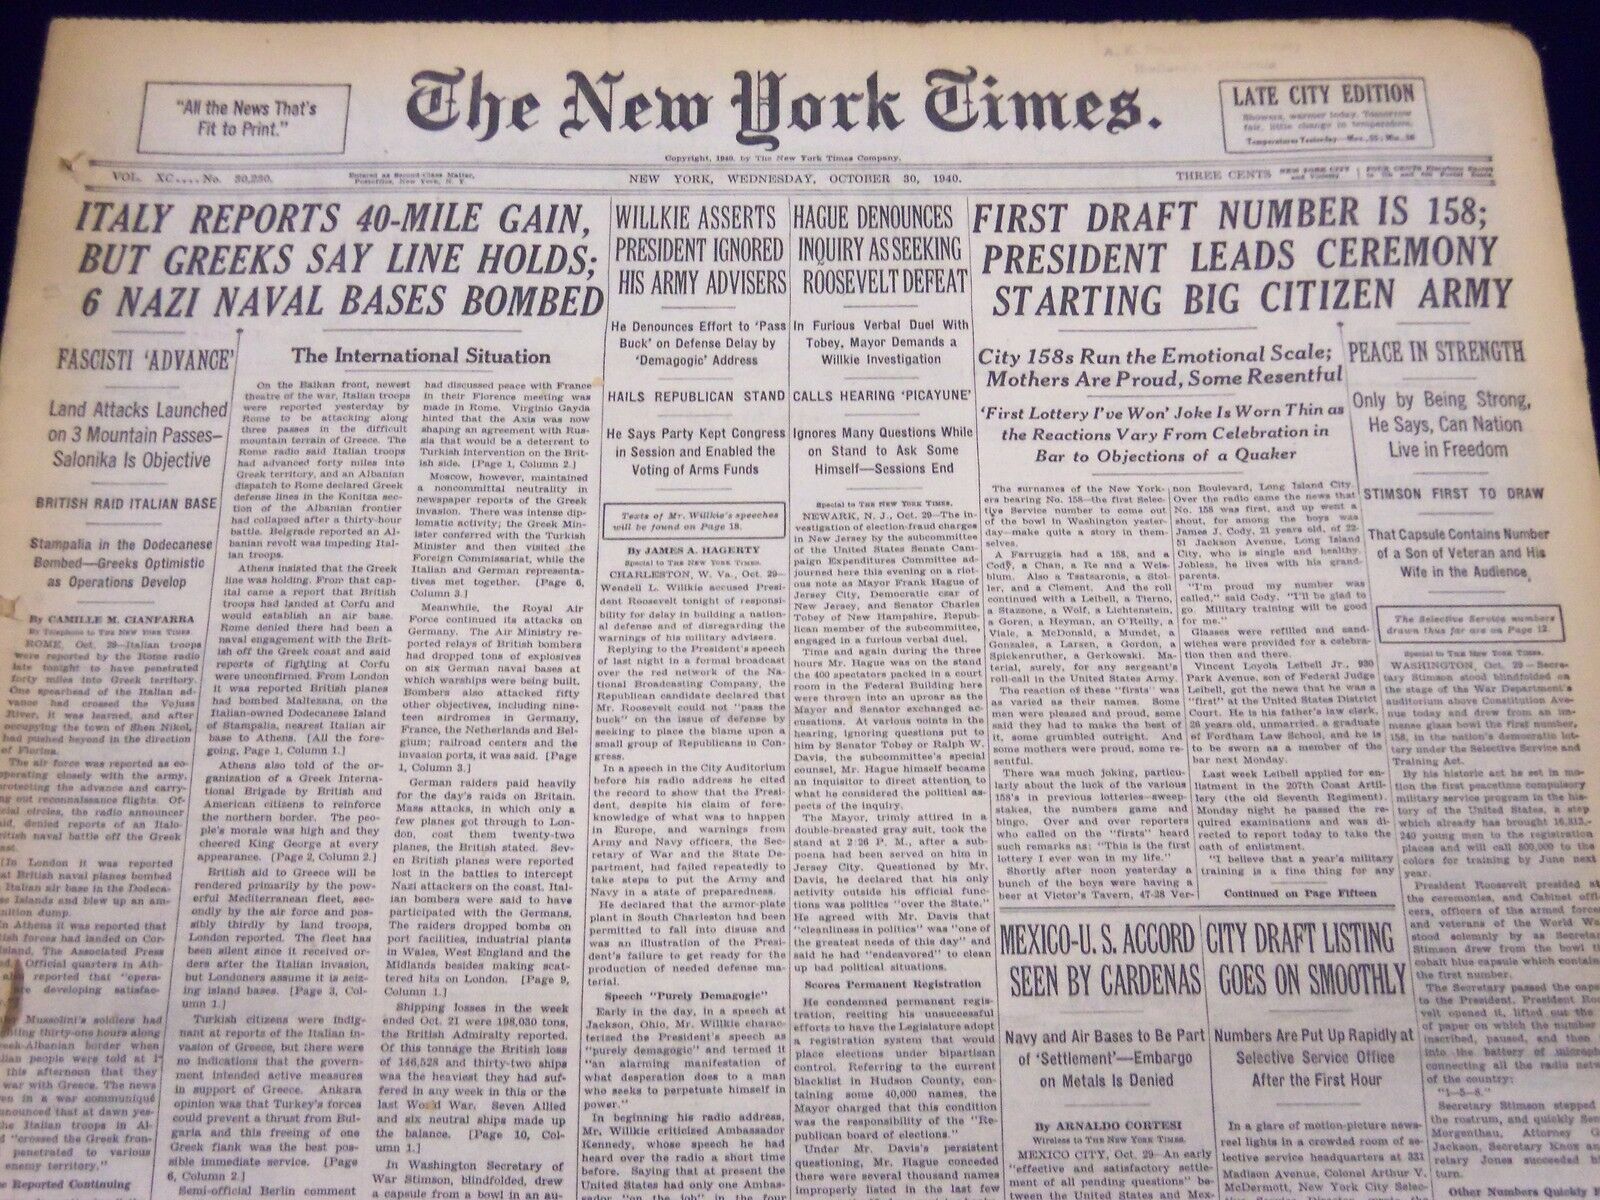 1940 OCT 30 NEW YORK TIMES - FIRST DRAFT NUMBER IS 158 PRESIDENT LEADS - NT 333